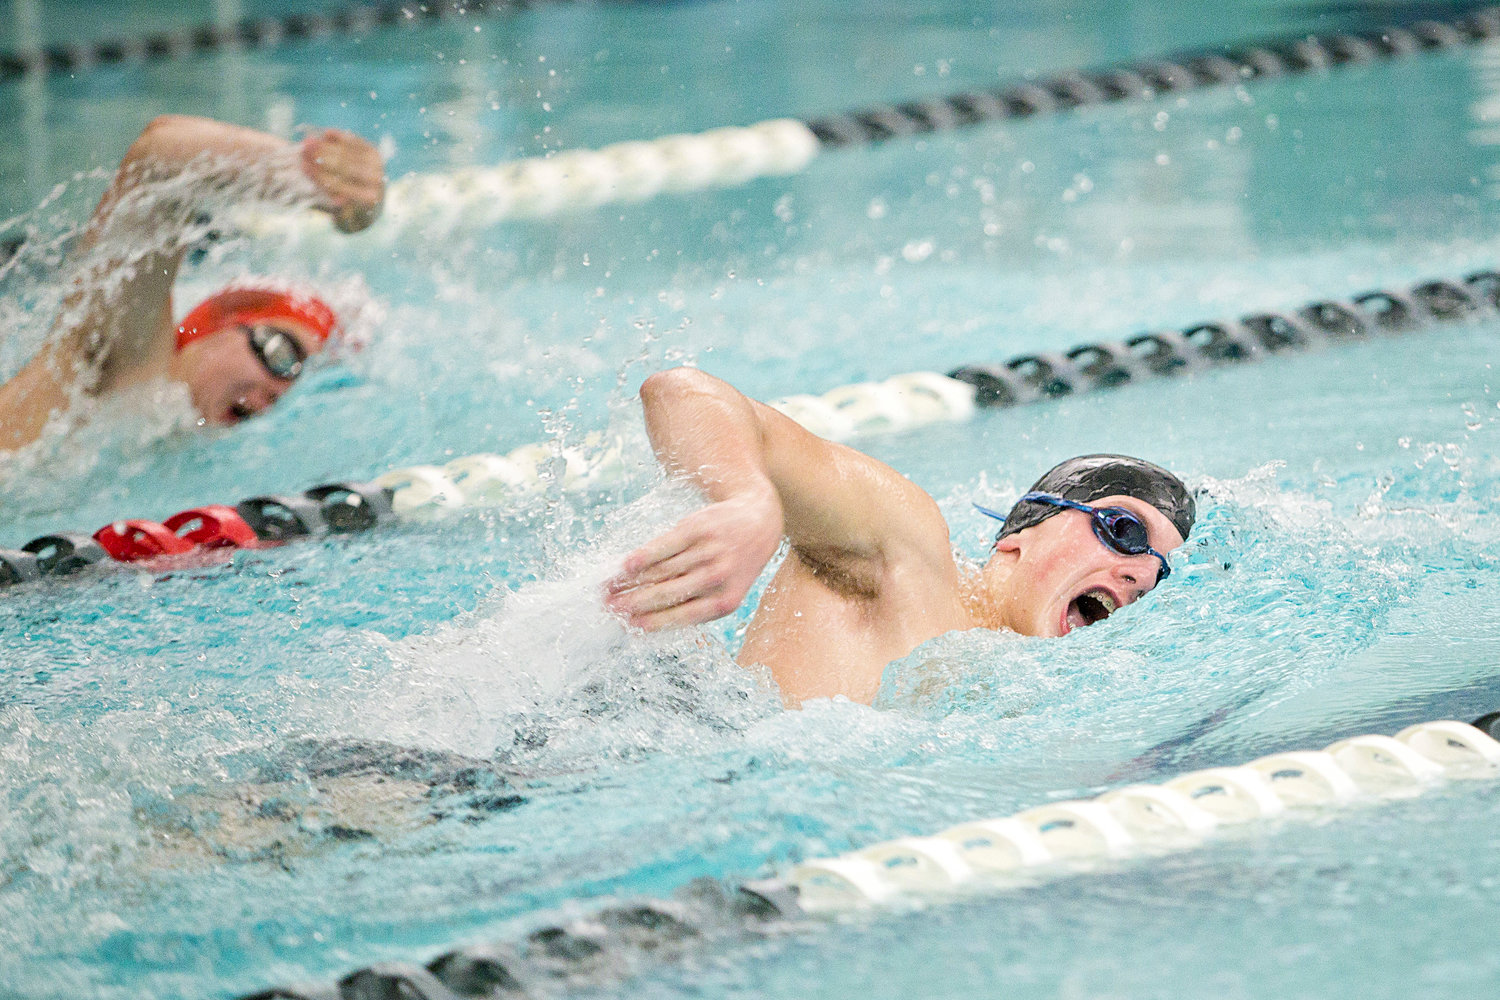 Jacob Perry takes the lead against his East Providence opponent while competing in the boys’ 200 freestyle event at a recent meet.